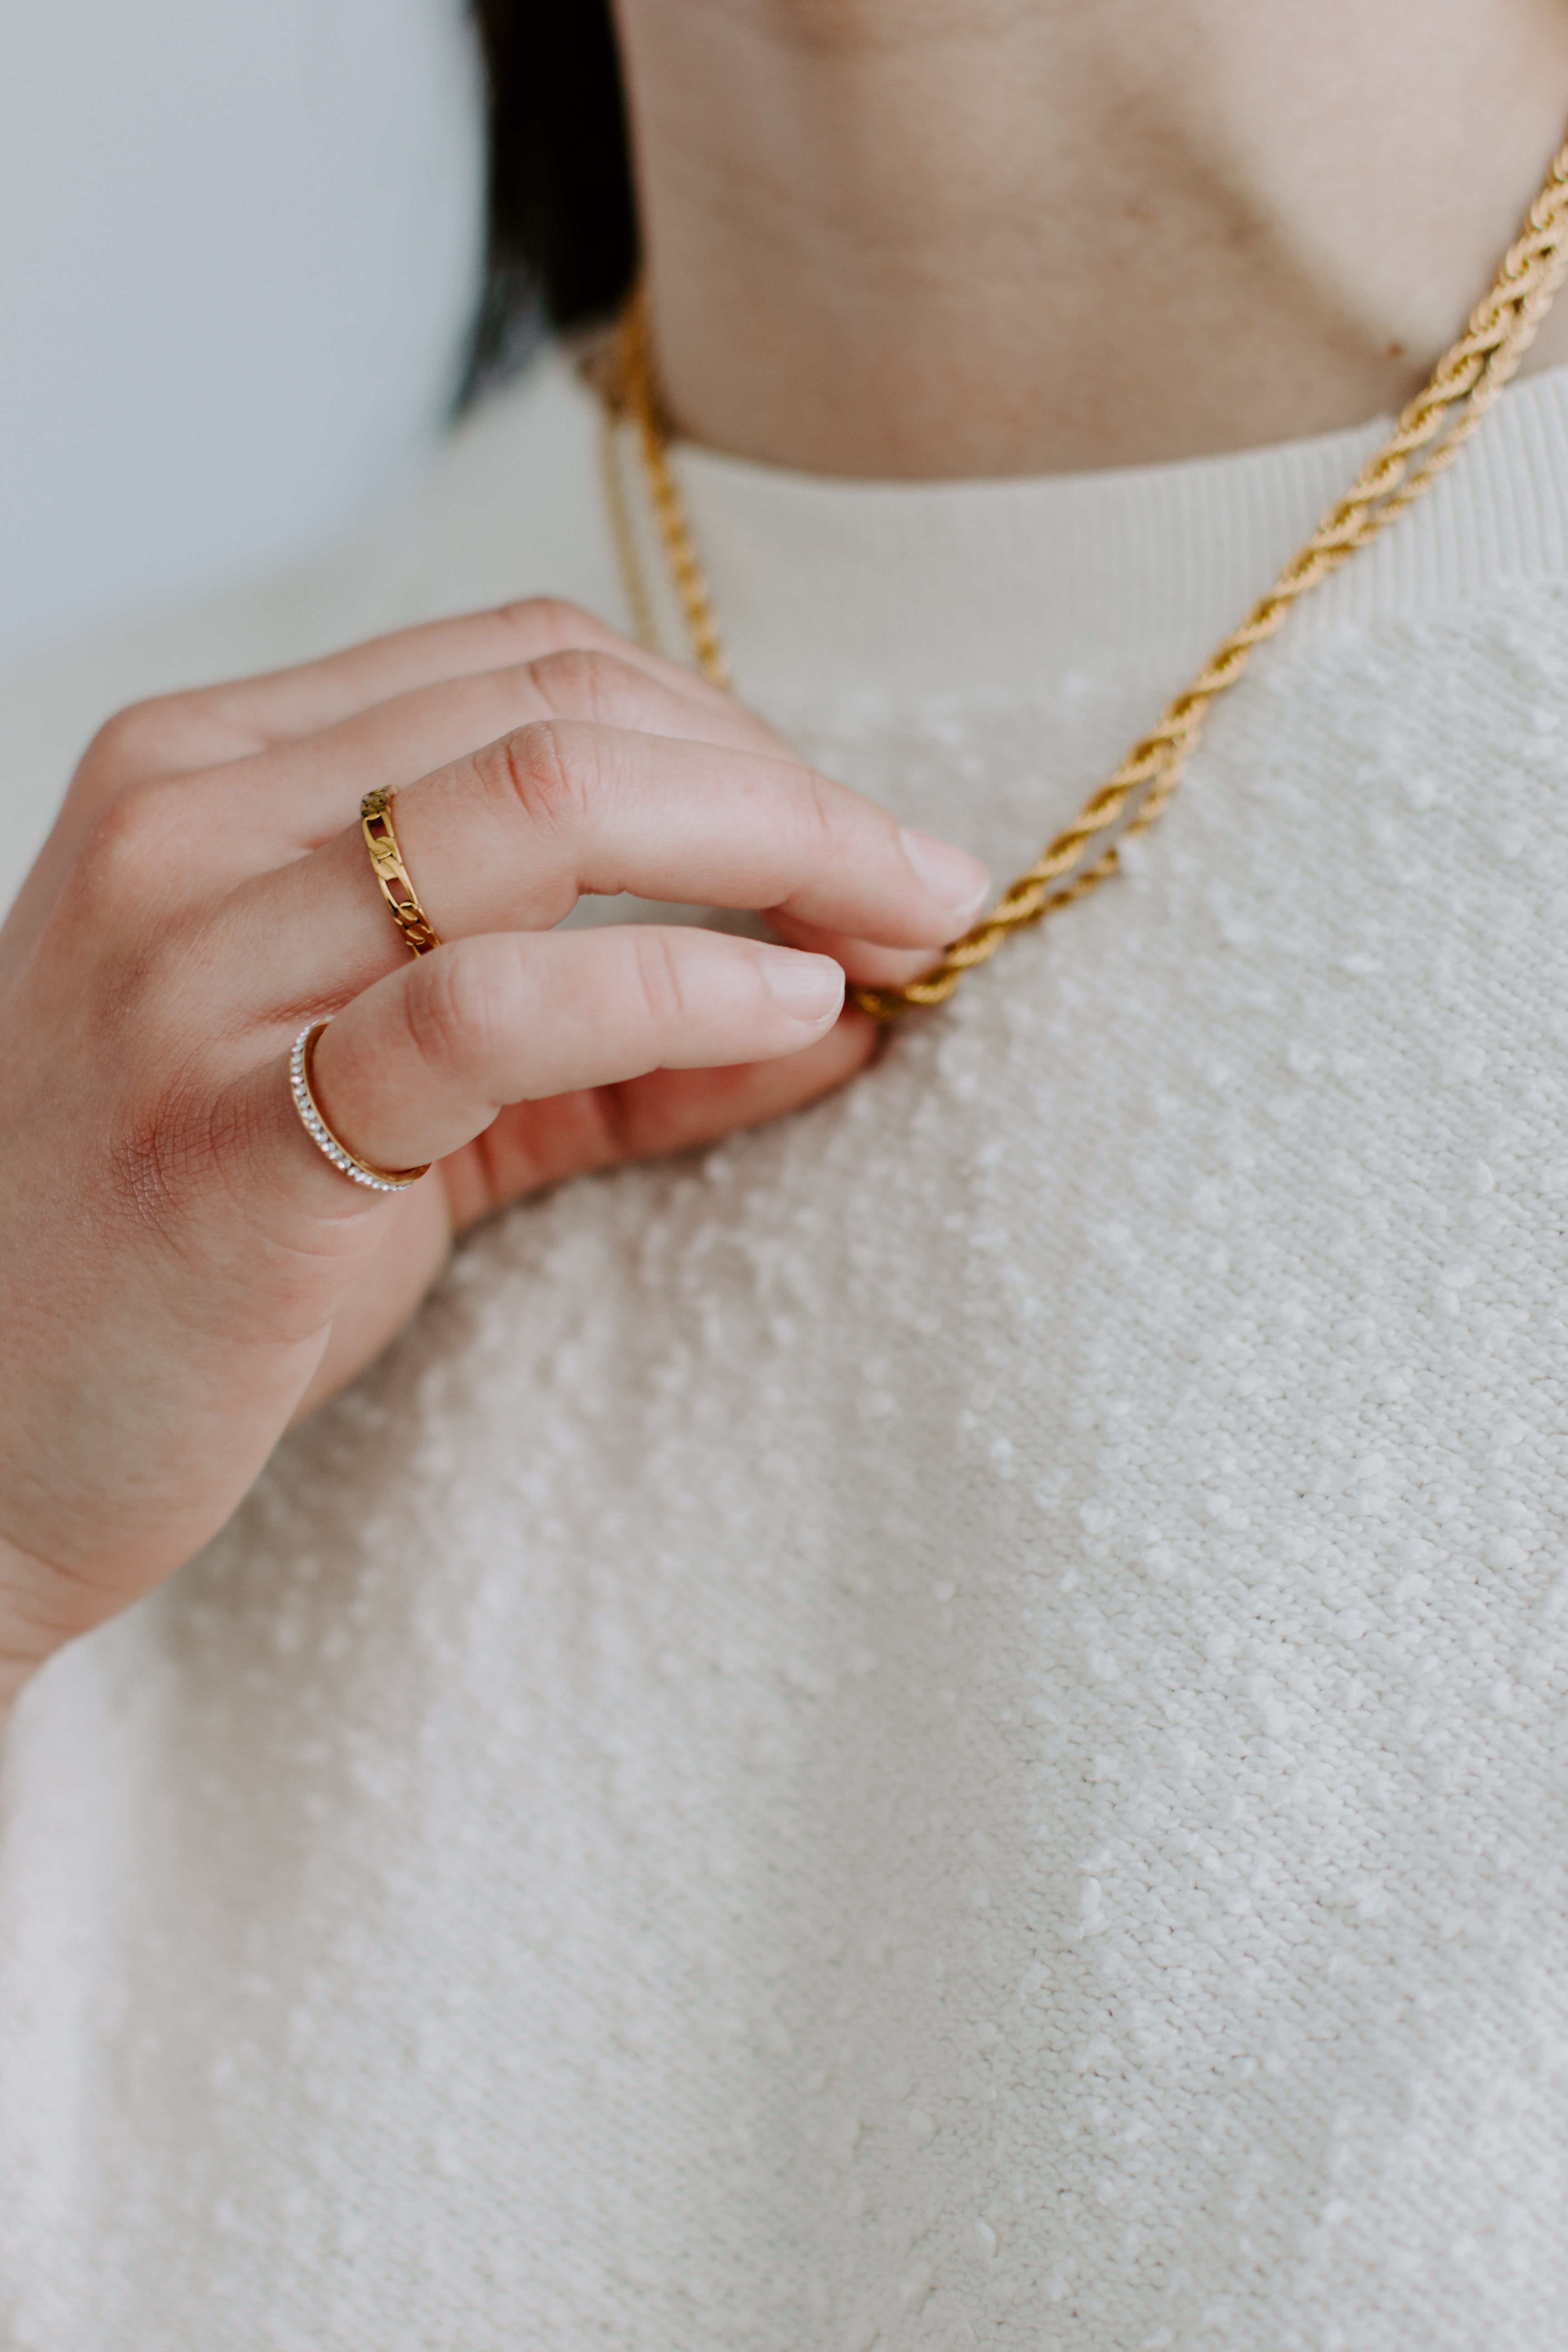 Chain style ring to compliment your growing ring stack! 14K Gold Plated Hypoallergenic Tarnish Resistant Available sizes: 6, 7, 8 | Sarah Ring | Non-tarnish 14k Jewellery EasyClubCo